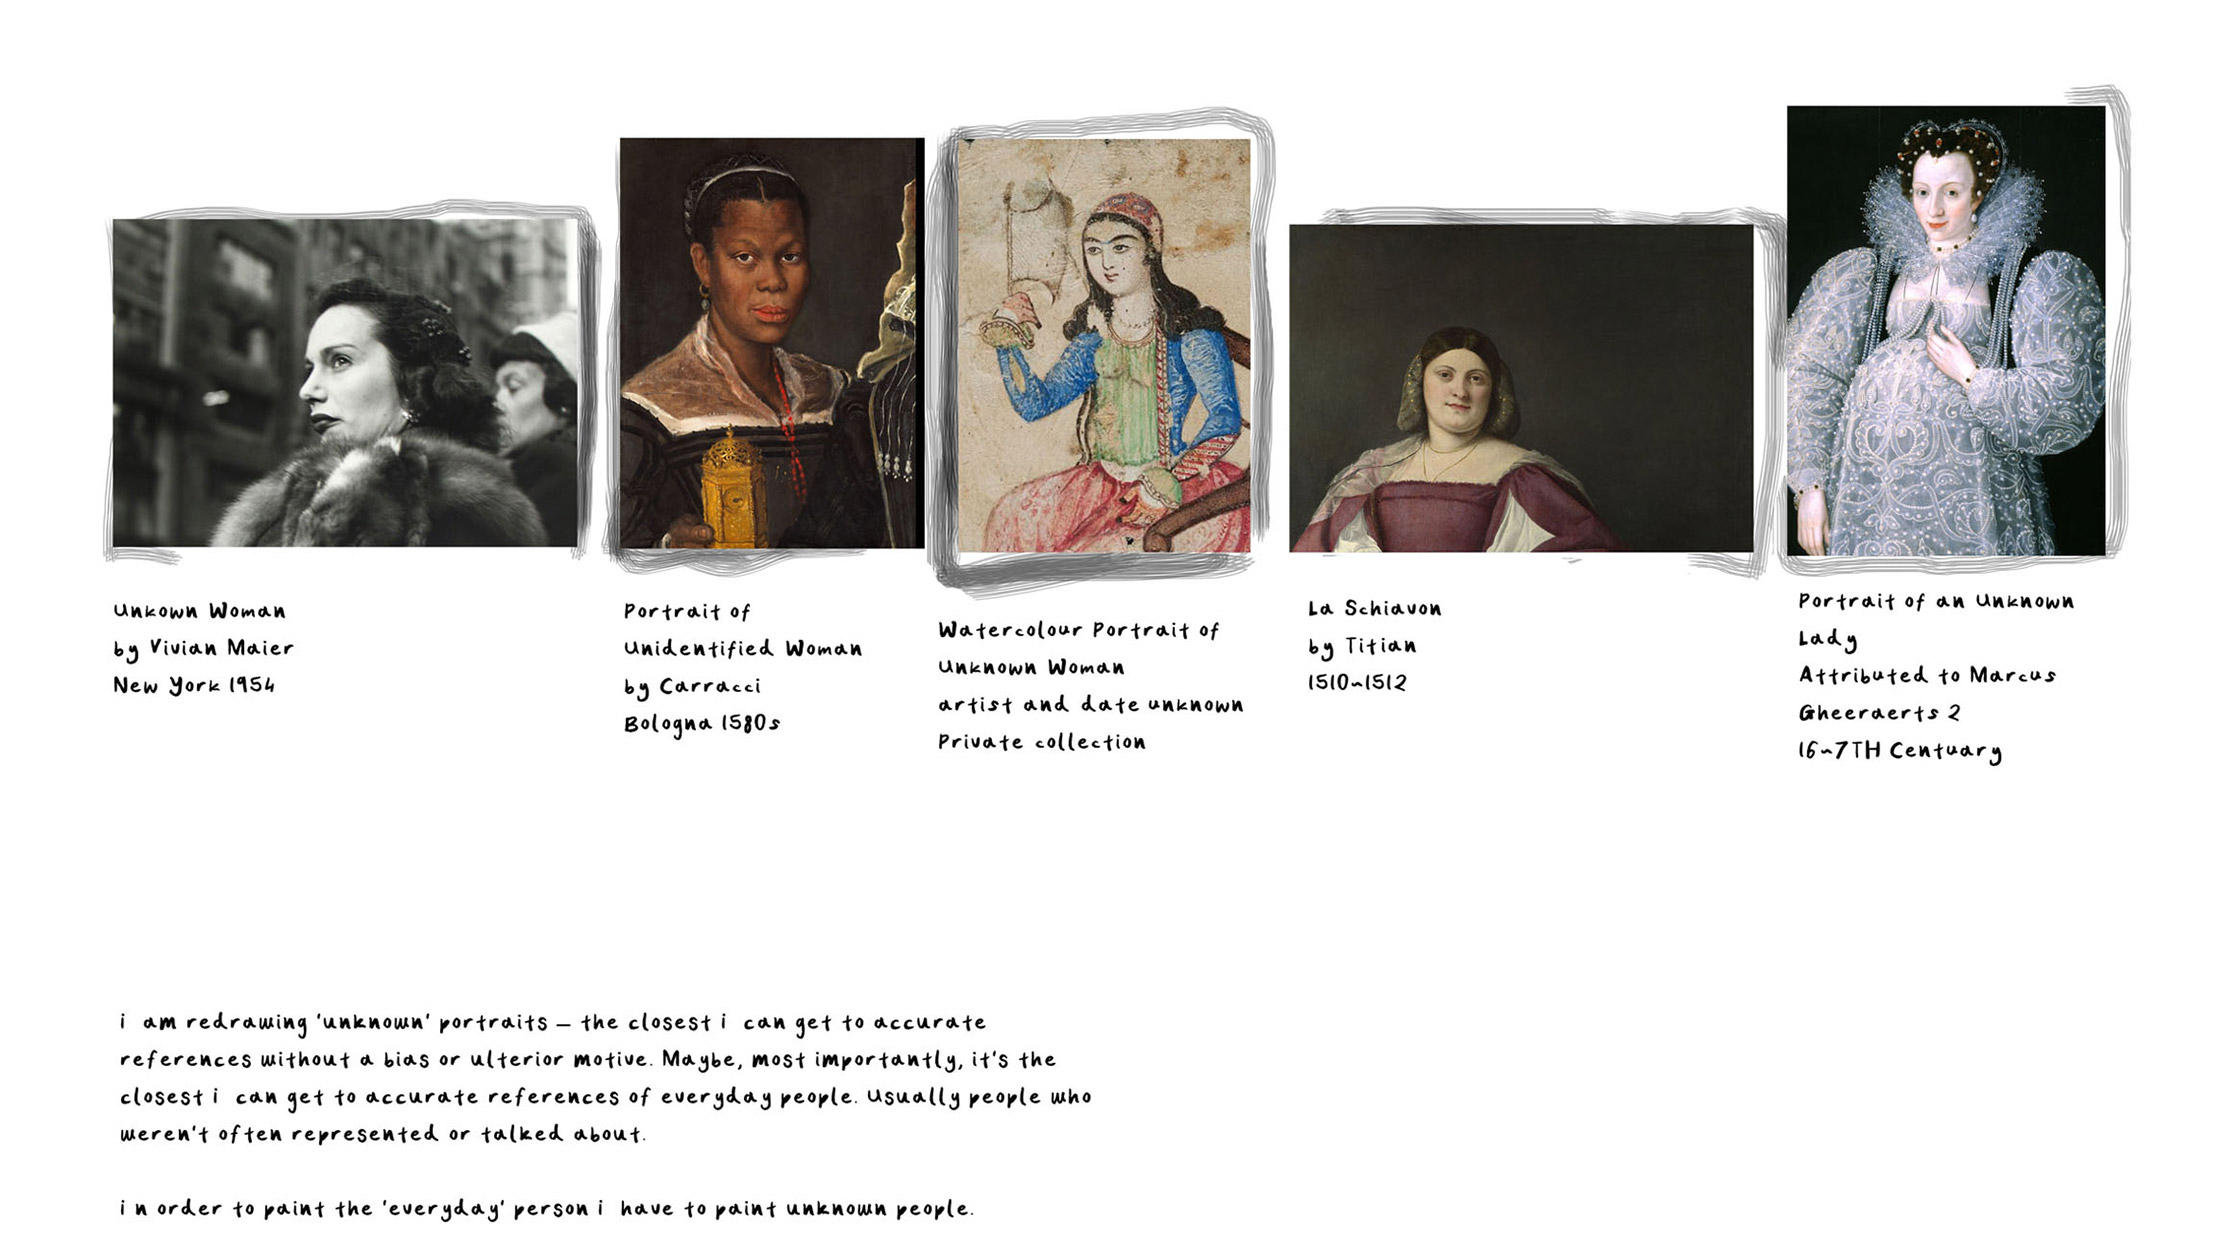 Reference material consisting of 5 unknown portraits from art history